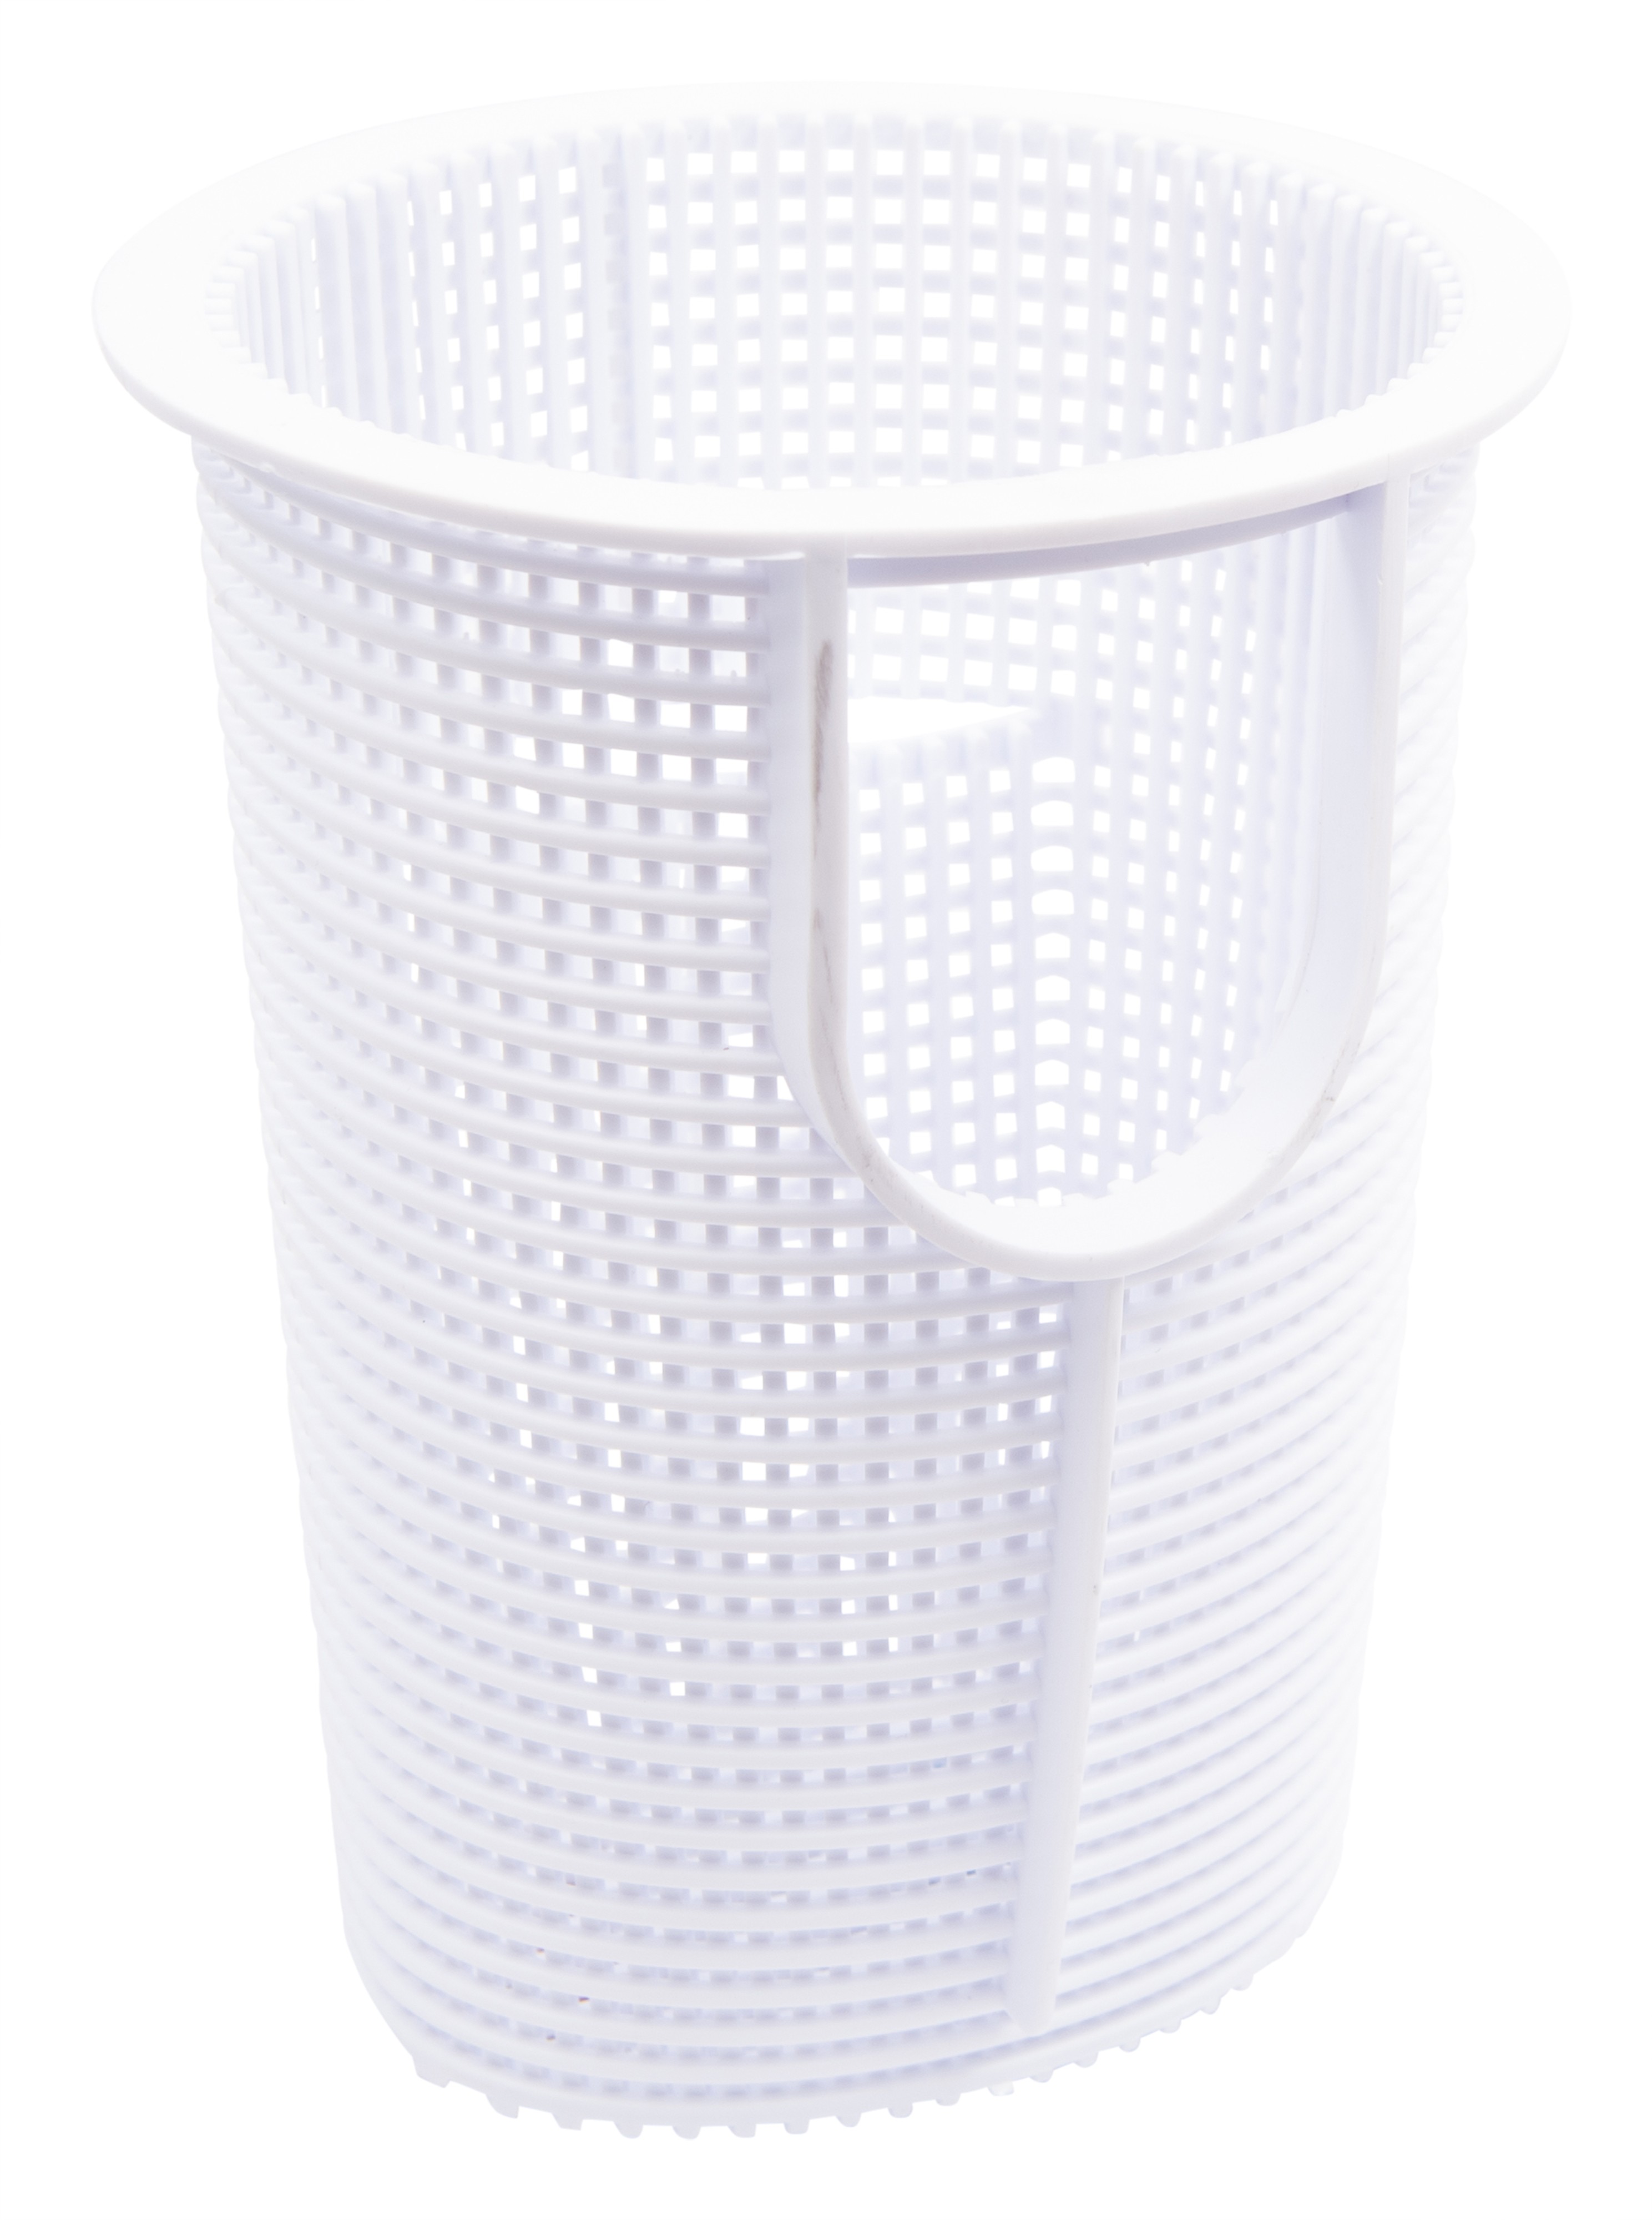 Replacement Strainer Basket for Splapool Above-Ground and In-Ground Pool Pumps